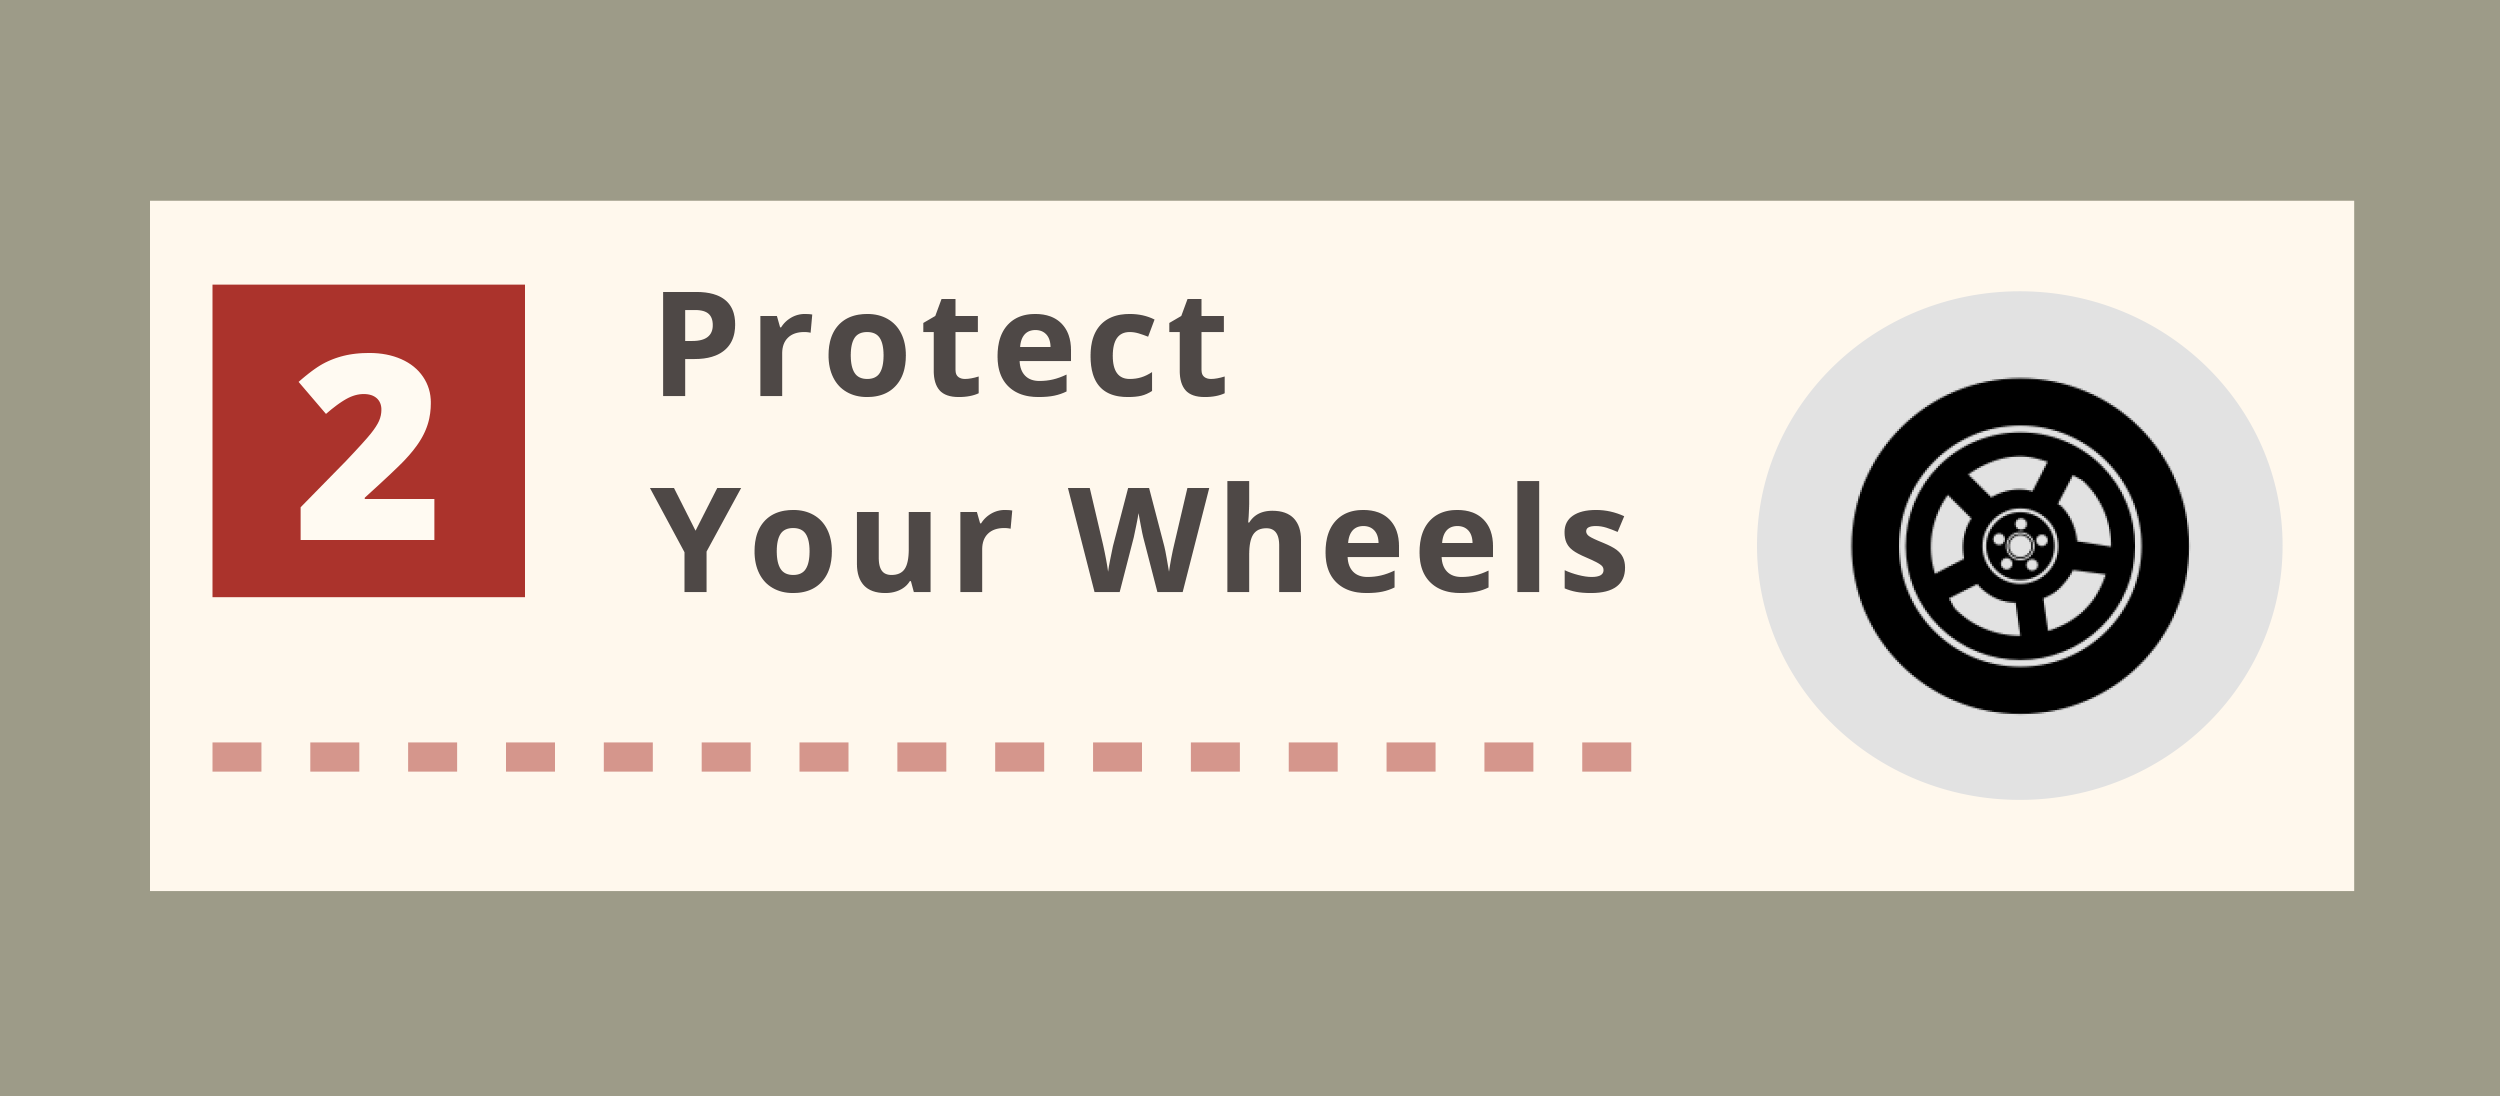 Protect Your Wheels